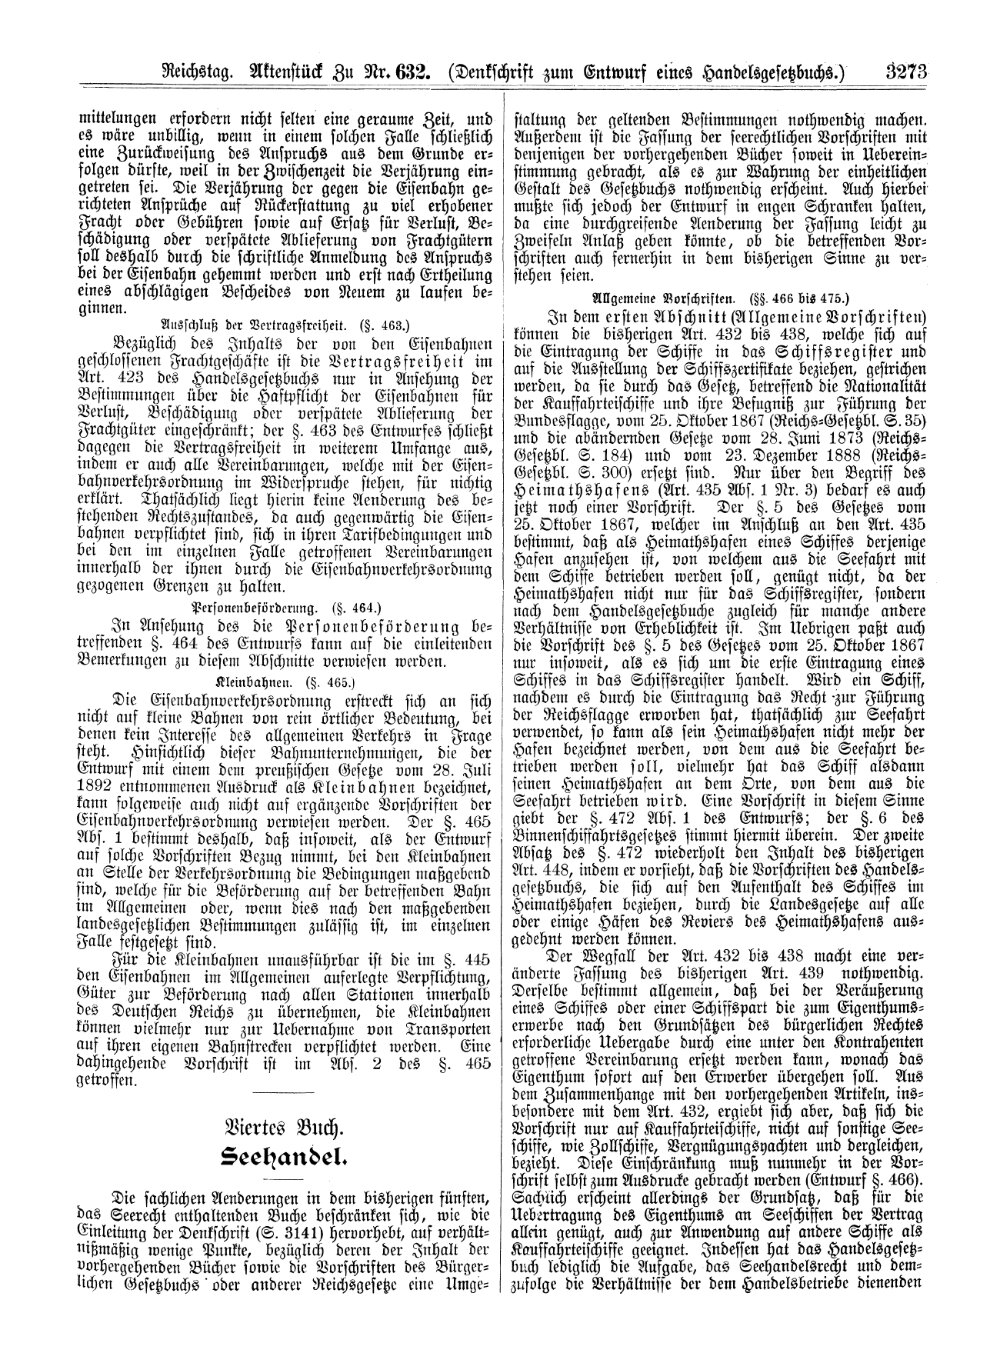 Scan of page 3273